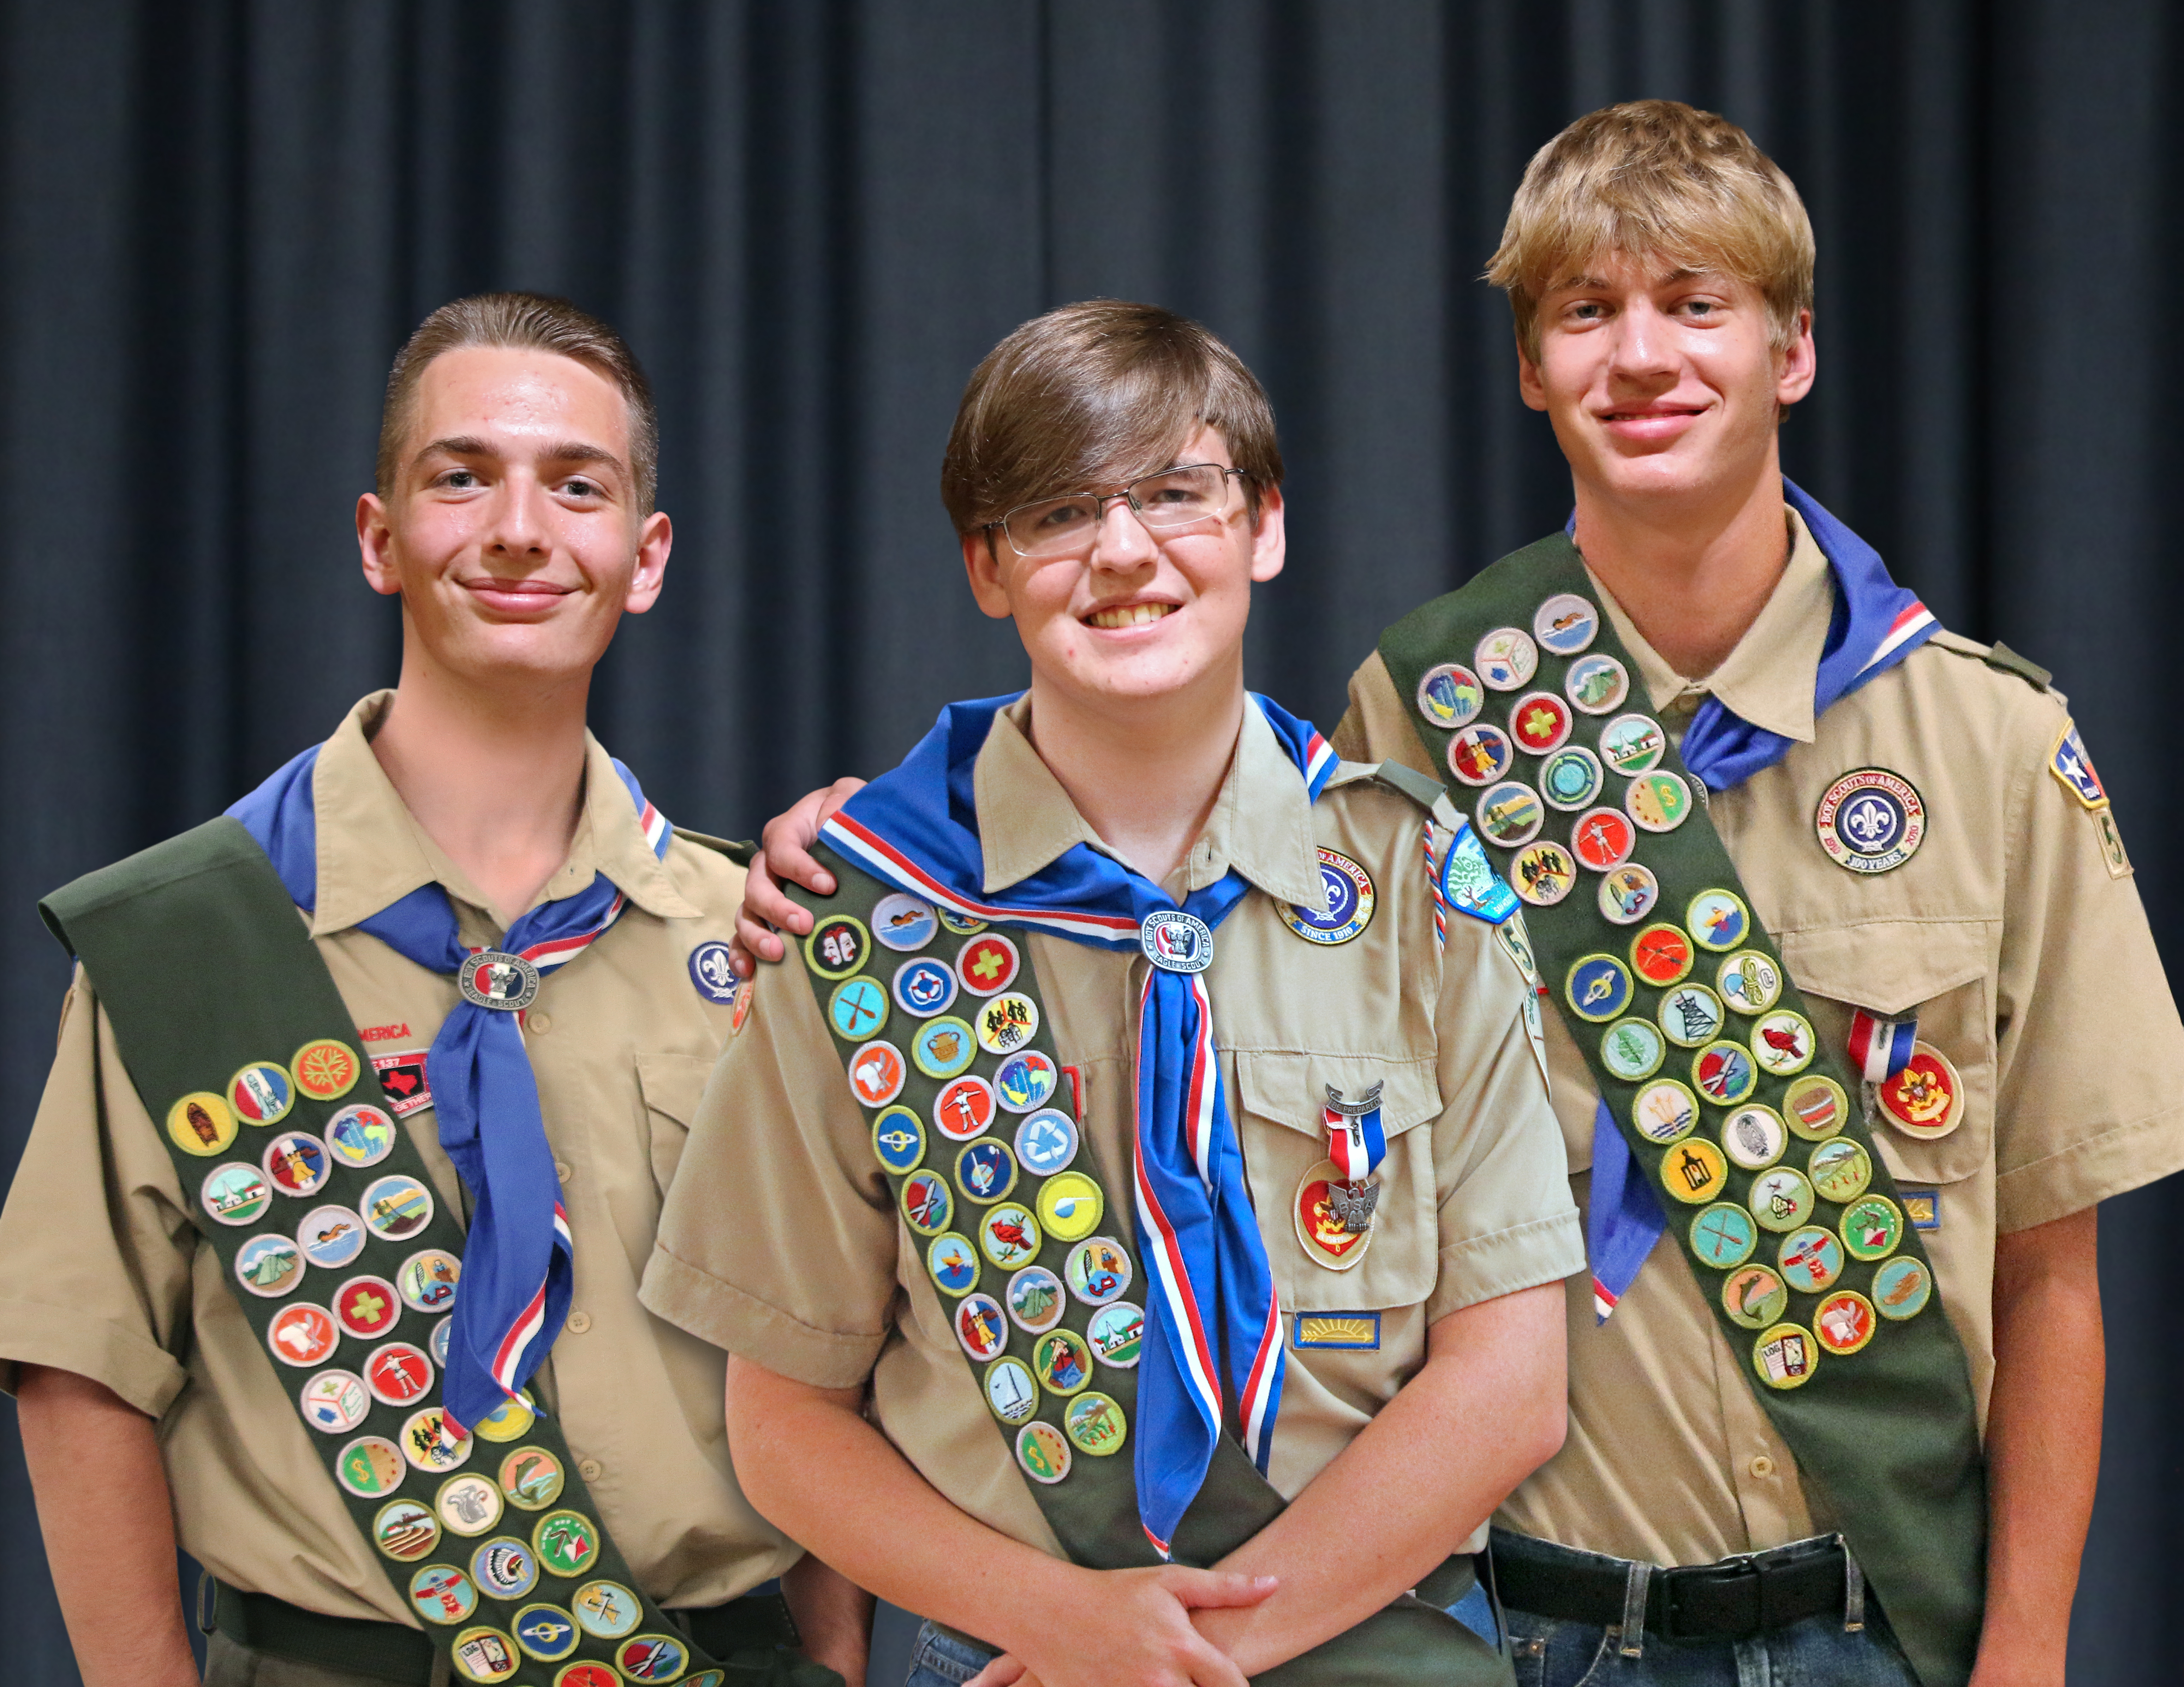 Eagle Scout trio honored